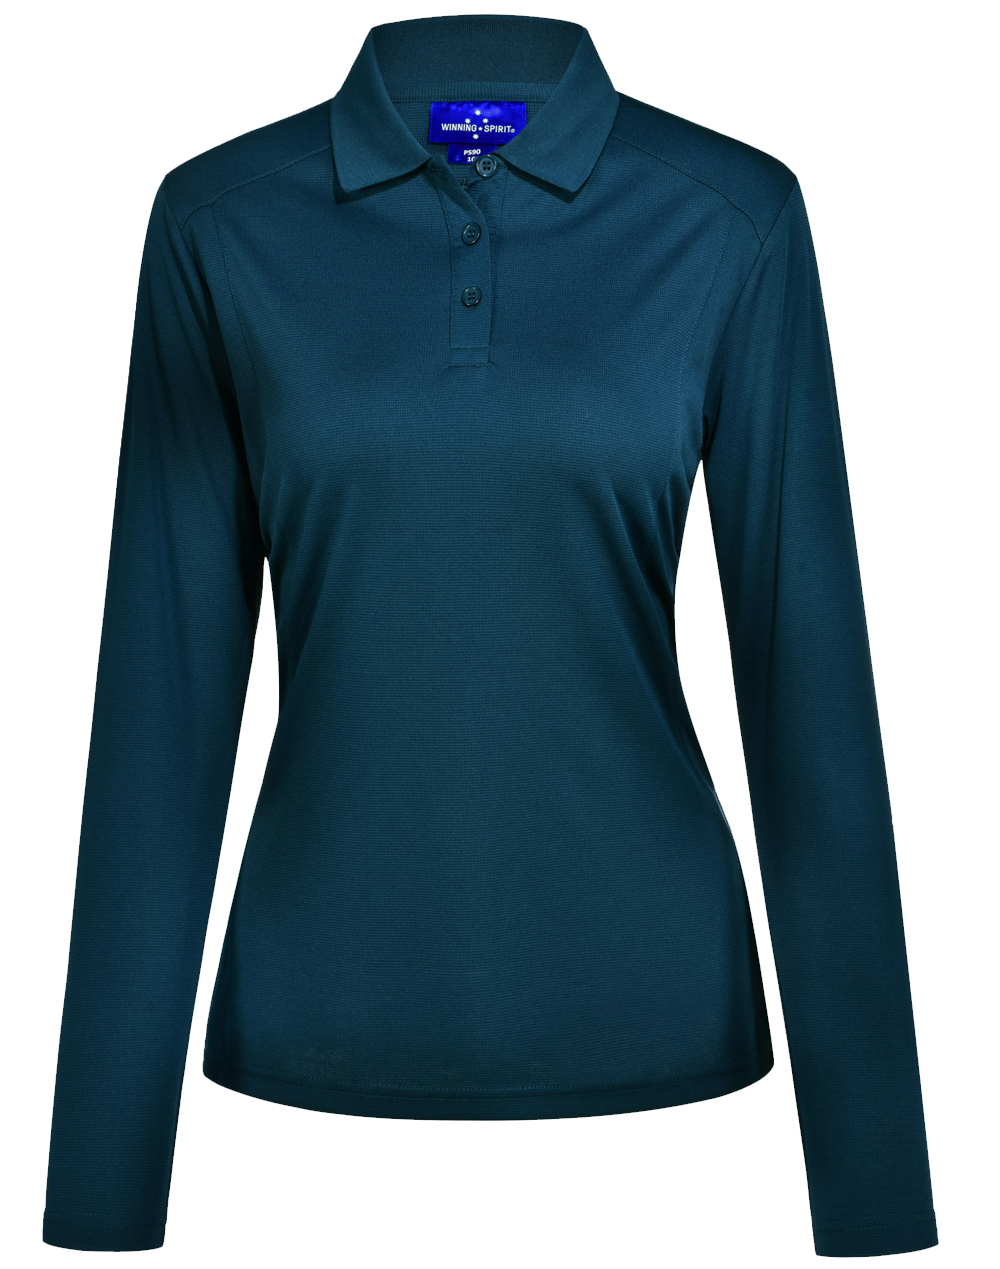 PS89 LUCKY BAMBOO LONG SLEEVE POLO Mens&Ladies